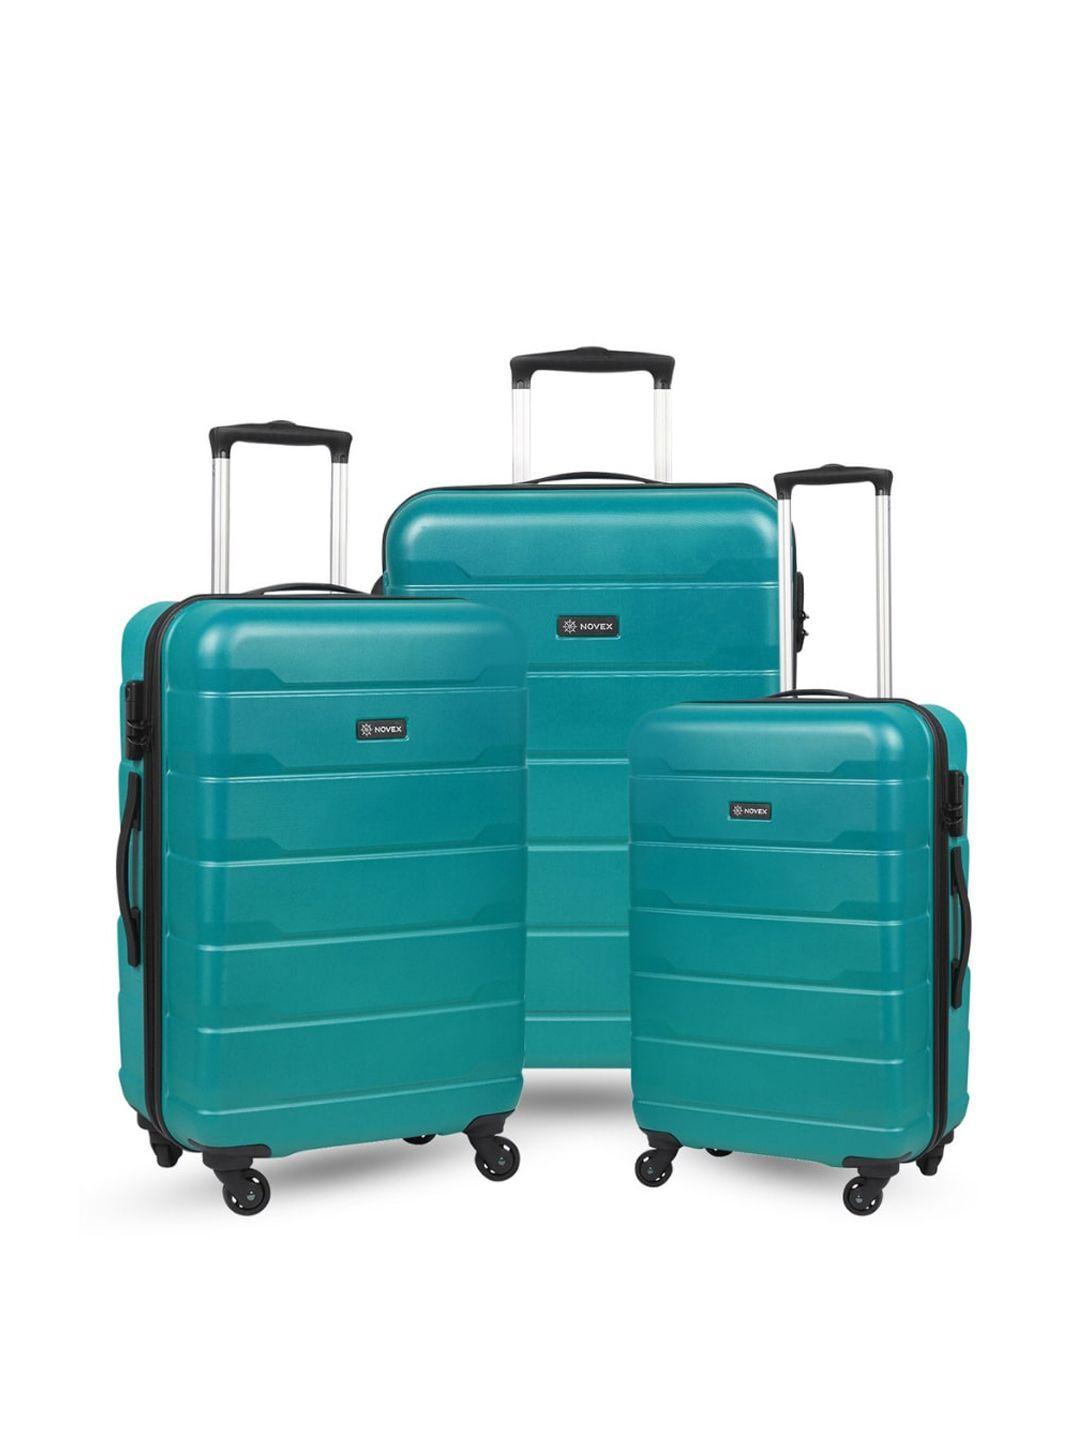 novex unisex set of 3 sea-green textured hard-sided trolley suitcases